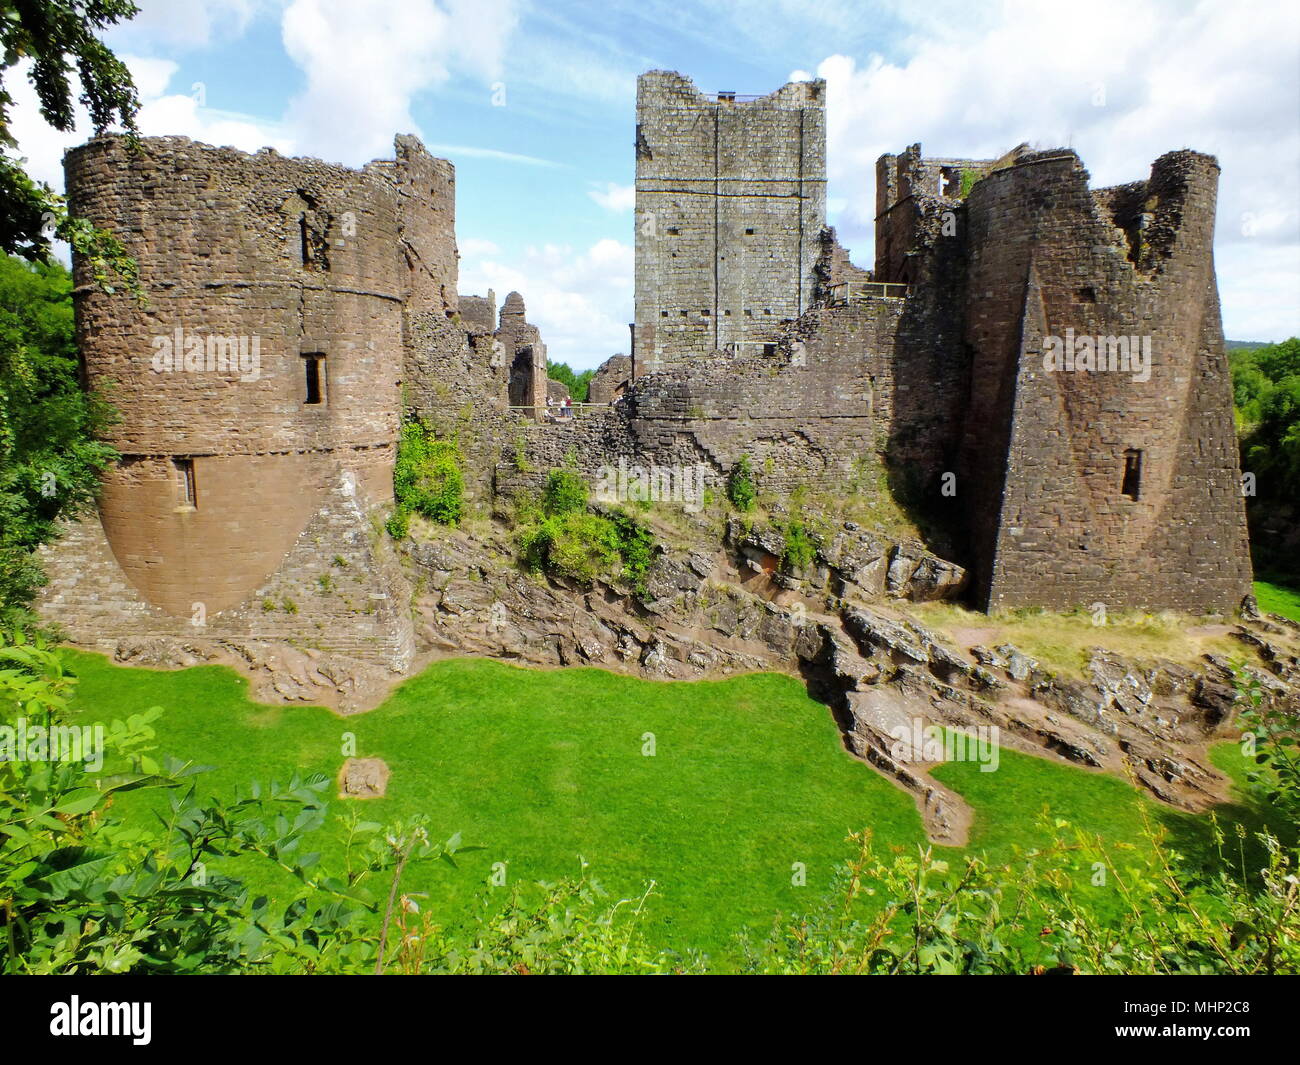 View of Goodrich Castle, near Ross on Wye, Herefordshire. The building was begun in the late 11th century by the thegn (thane) Godric, with later additions. It stands on a hill near the River Wye and is open to the public.     Date: circa 2010s Stock Photo